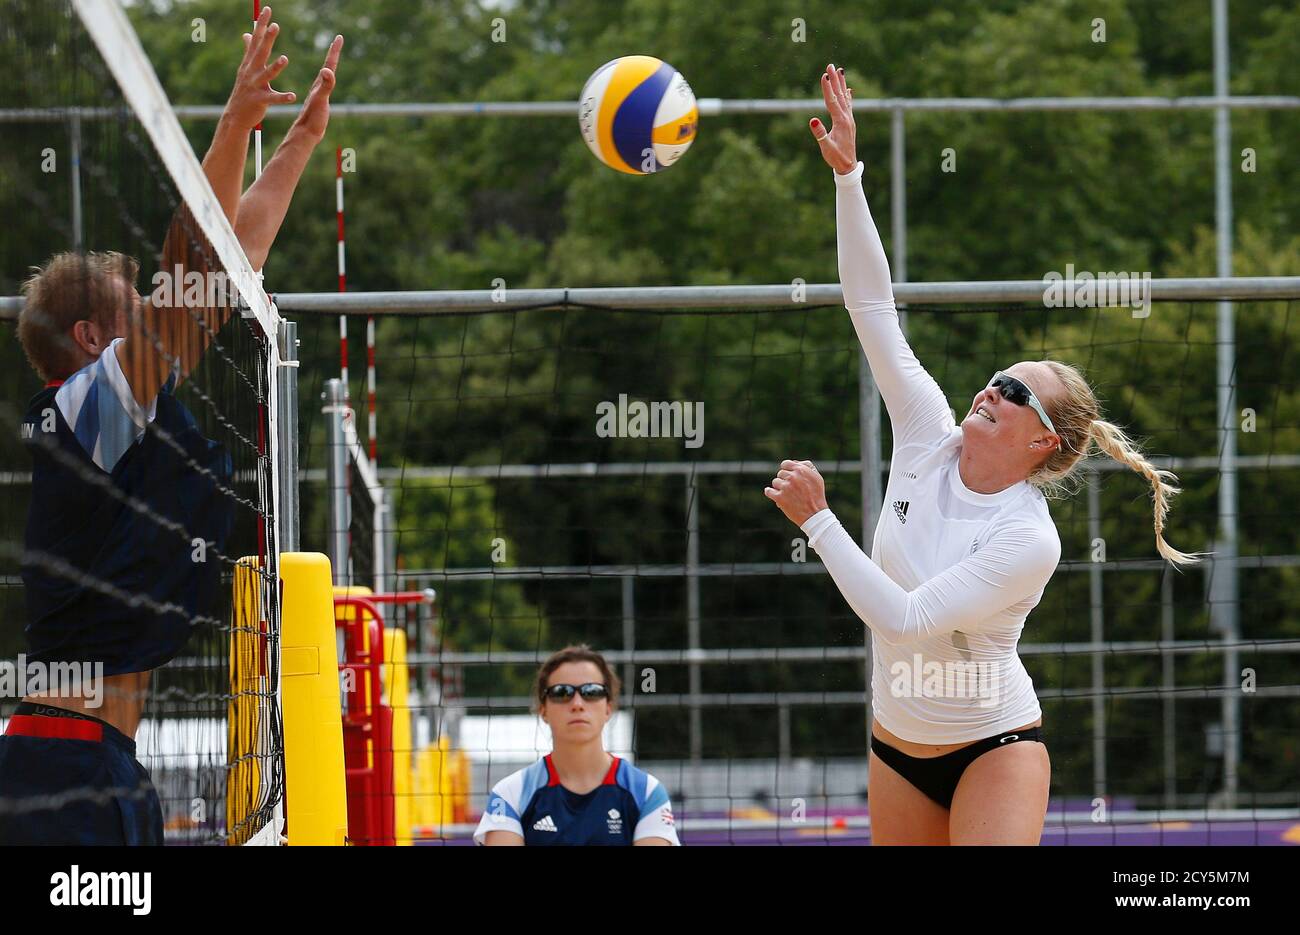 Britain's beach volleyball player Shauna Mullin (R) trains at the London 2012 Olympics beach volleyball venue in central London July 19, 2012. REUTERS/Suzanne Plunkett (BRITAIN - Tags: SPORT OLYMPICS SOCIETY VOLLEYBALL) Stock Photo